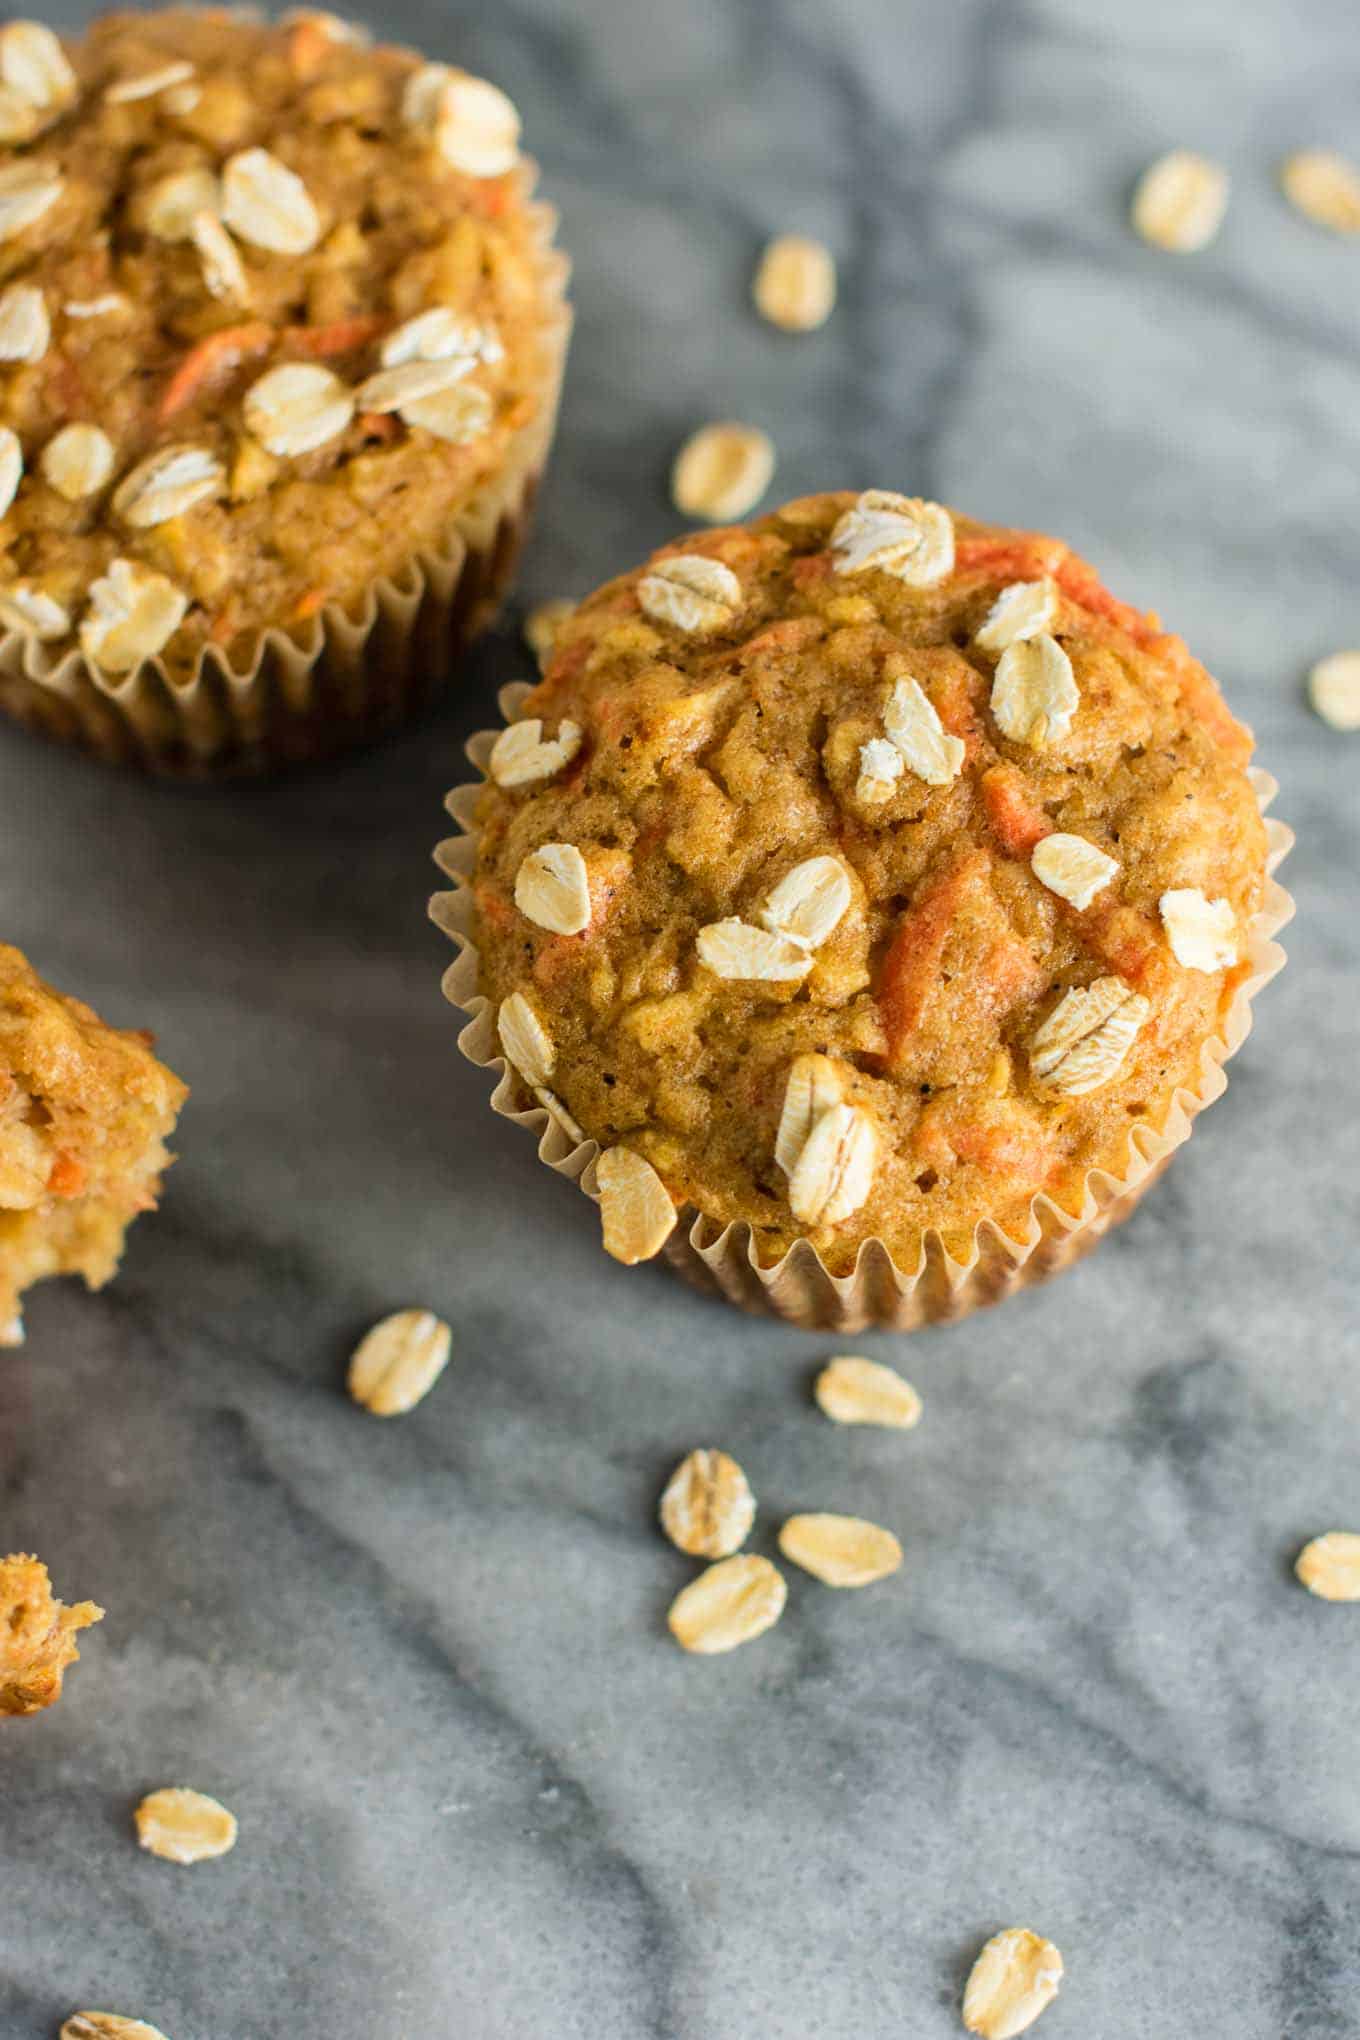 Wholesome Carrot Apple Muffins made with pure maple syrup and greek yogurt. Kids will love these! A feel good breakfast or snack for the whole family. (oil free, naturally sweetened) #carrotapplemuffins #healthymuffins #healthysnack #kidfriendlysnack #greekyogurt #vegetarian